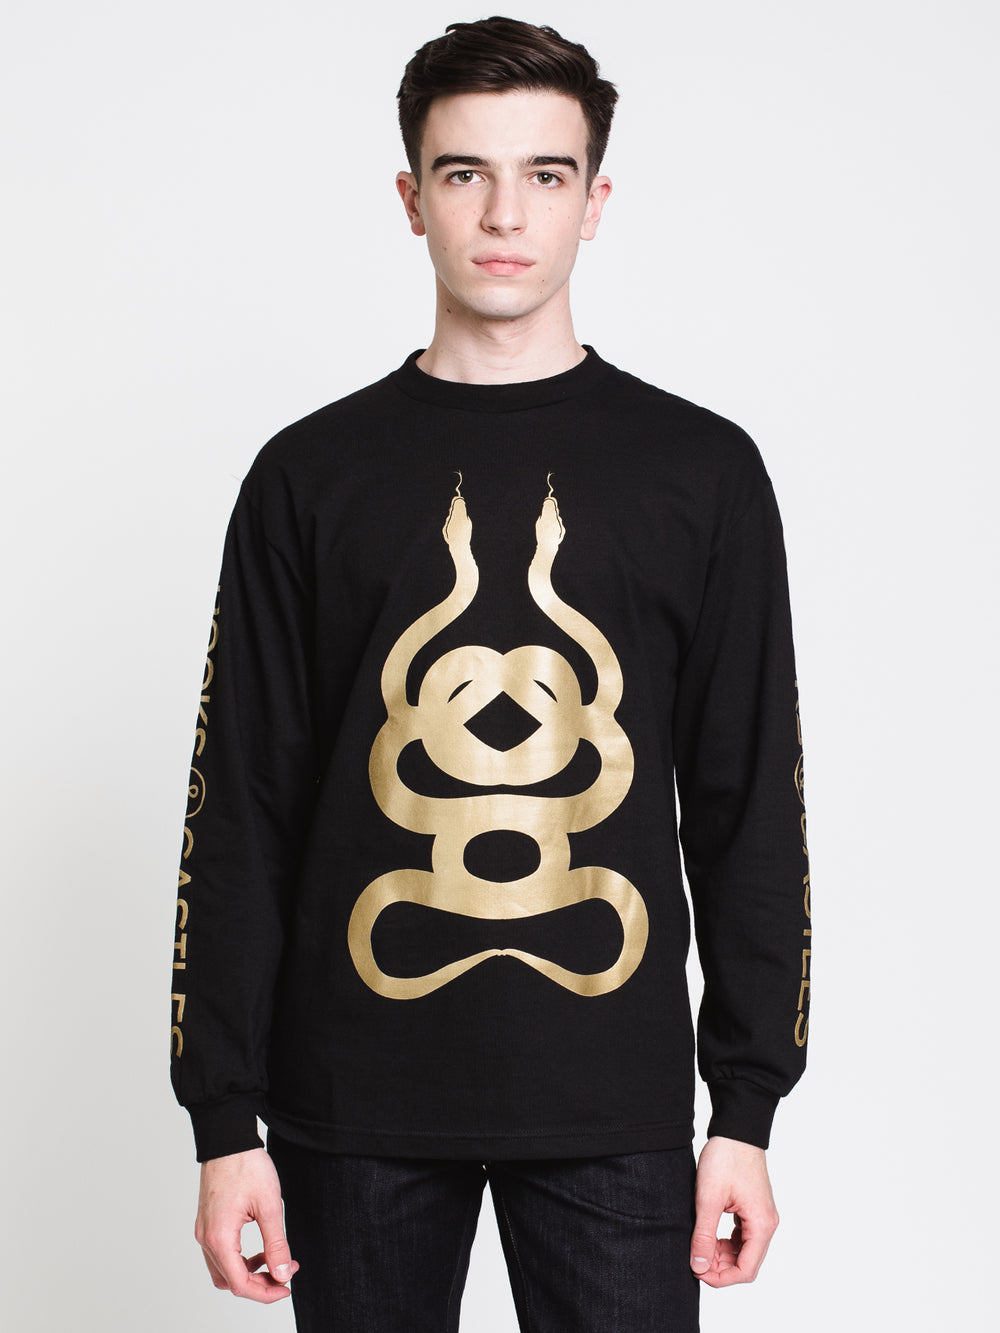 MENS GOLD DUEL SNAKES LONG SLEEVE T-SHIRT - BLACK - CLEARANCE